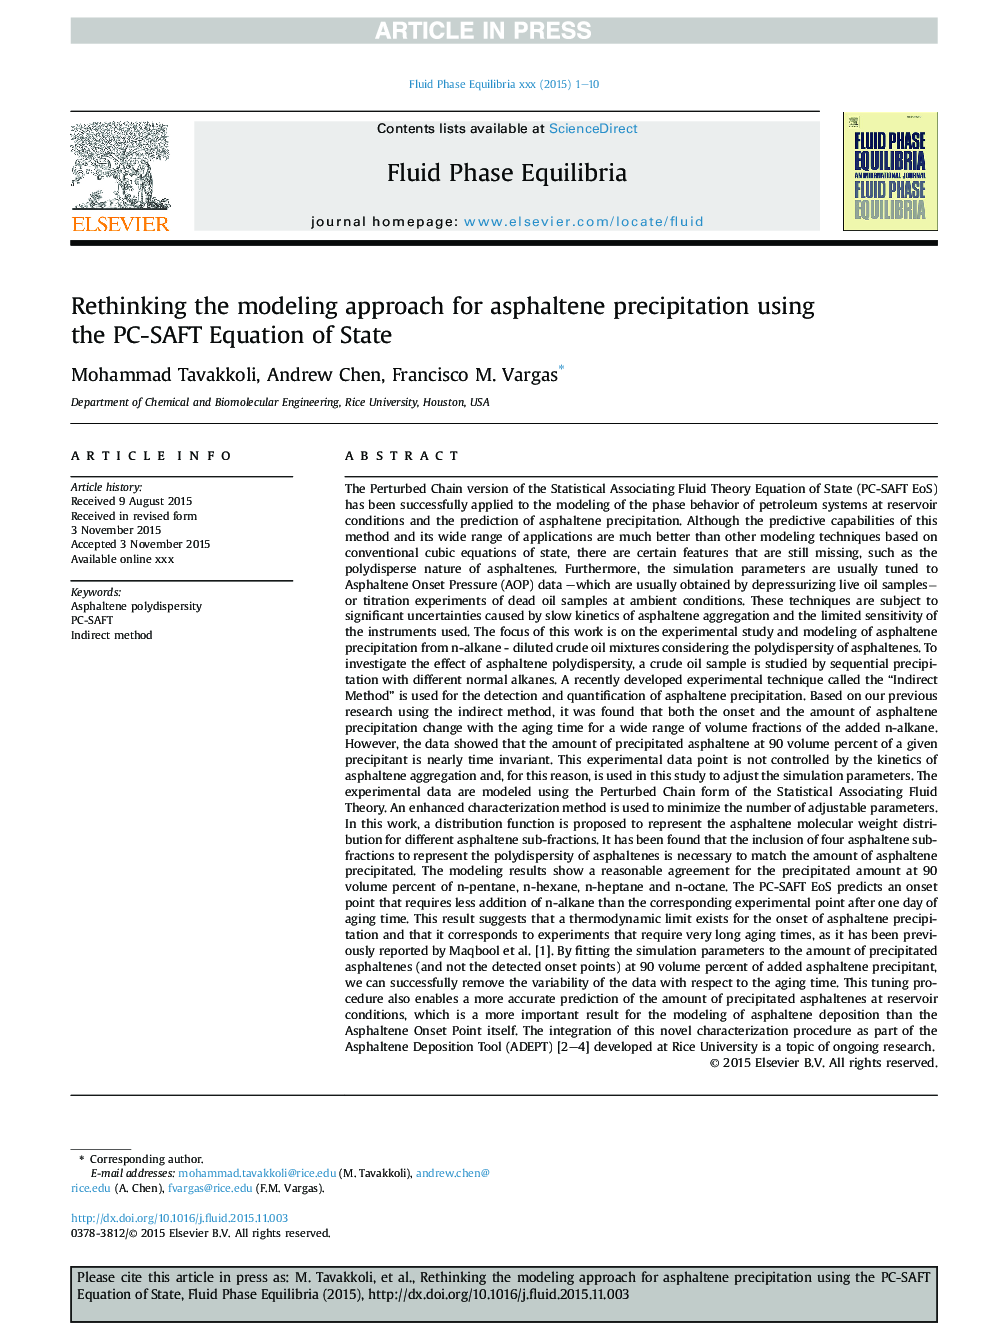 Rethinking the modeling approach for asphaltene precipitation using the PC-SAFT Equation of State